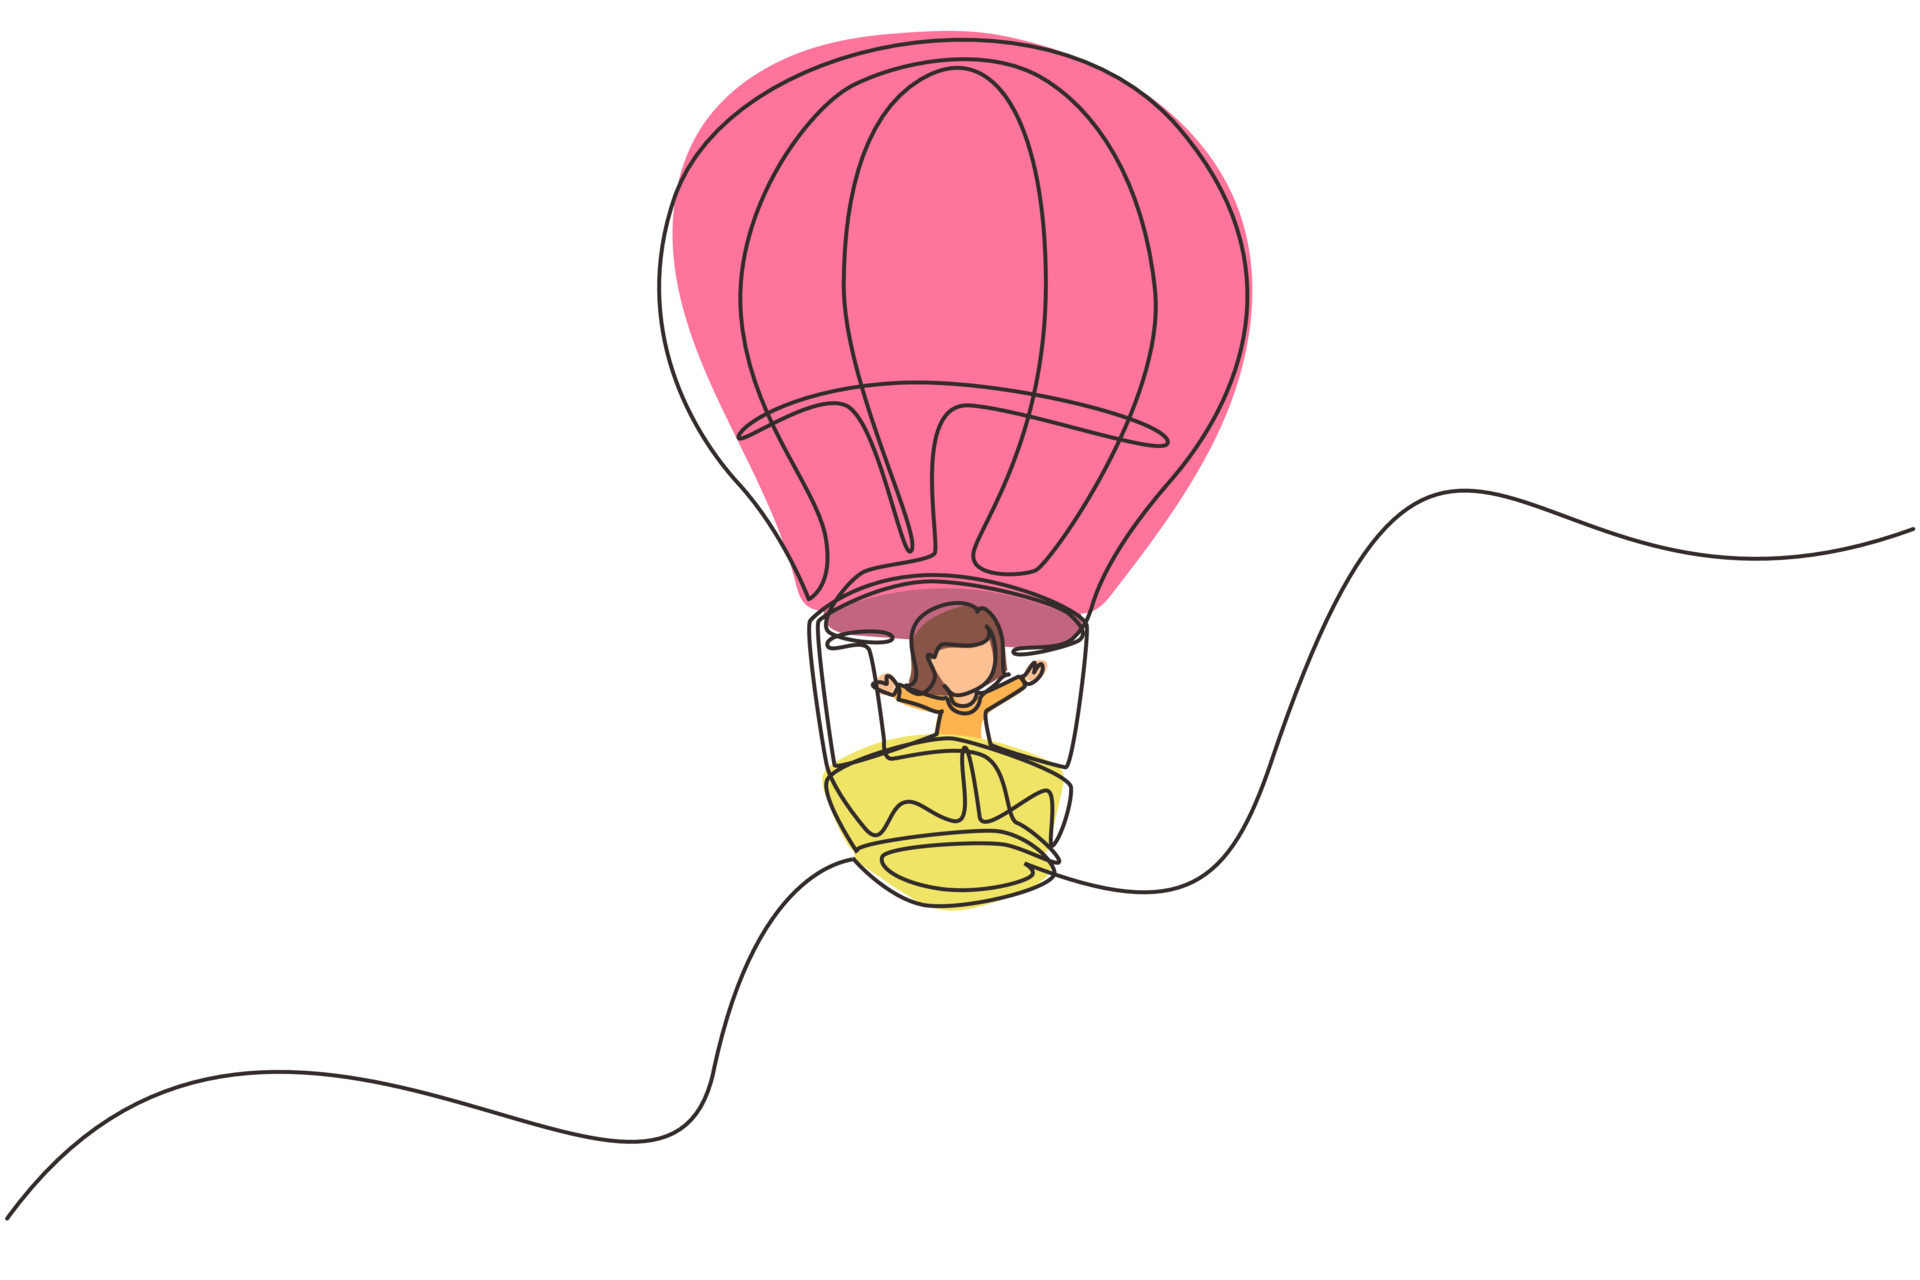 How to Draw a Hot Air Balloon